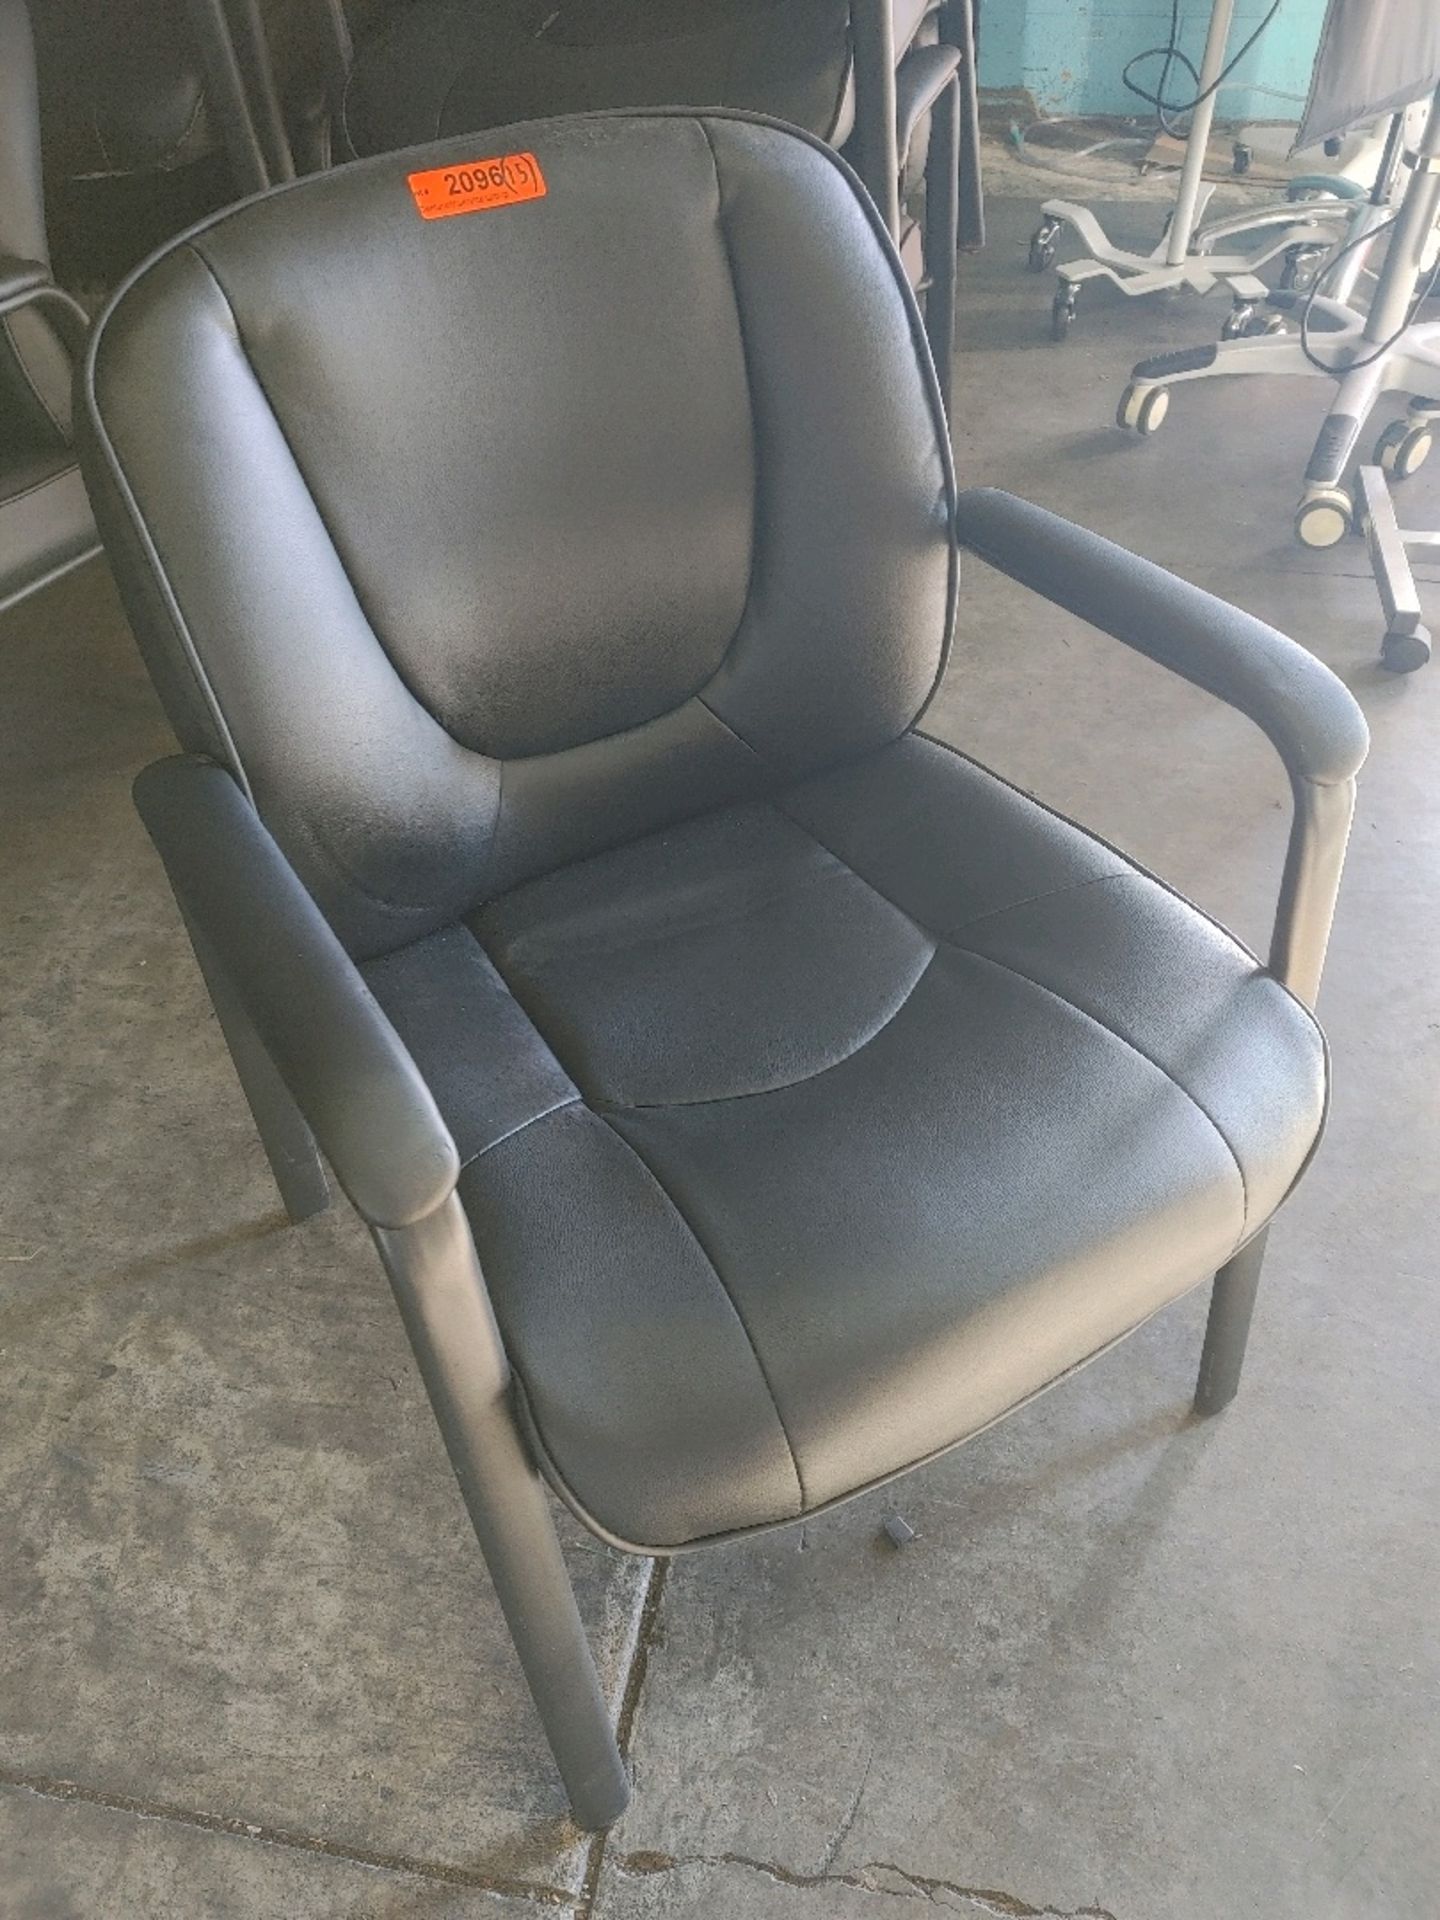 VARIOUS TASK OFFICE ARM-CHAIRS QTY: 15, LOCATED: 3821 N. FRATNEY STREET MILWAUKEE, WI 53212